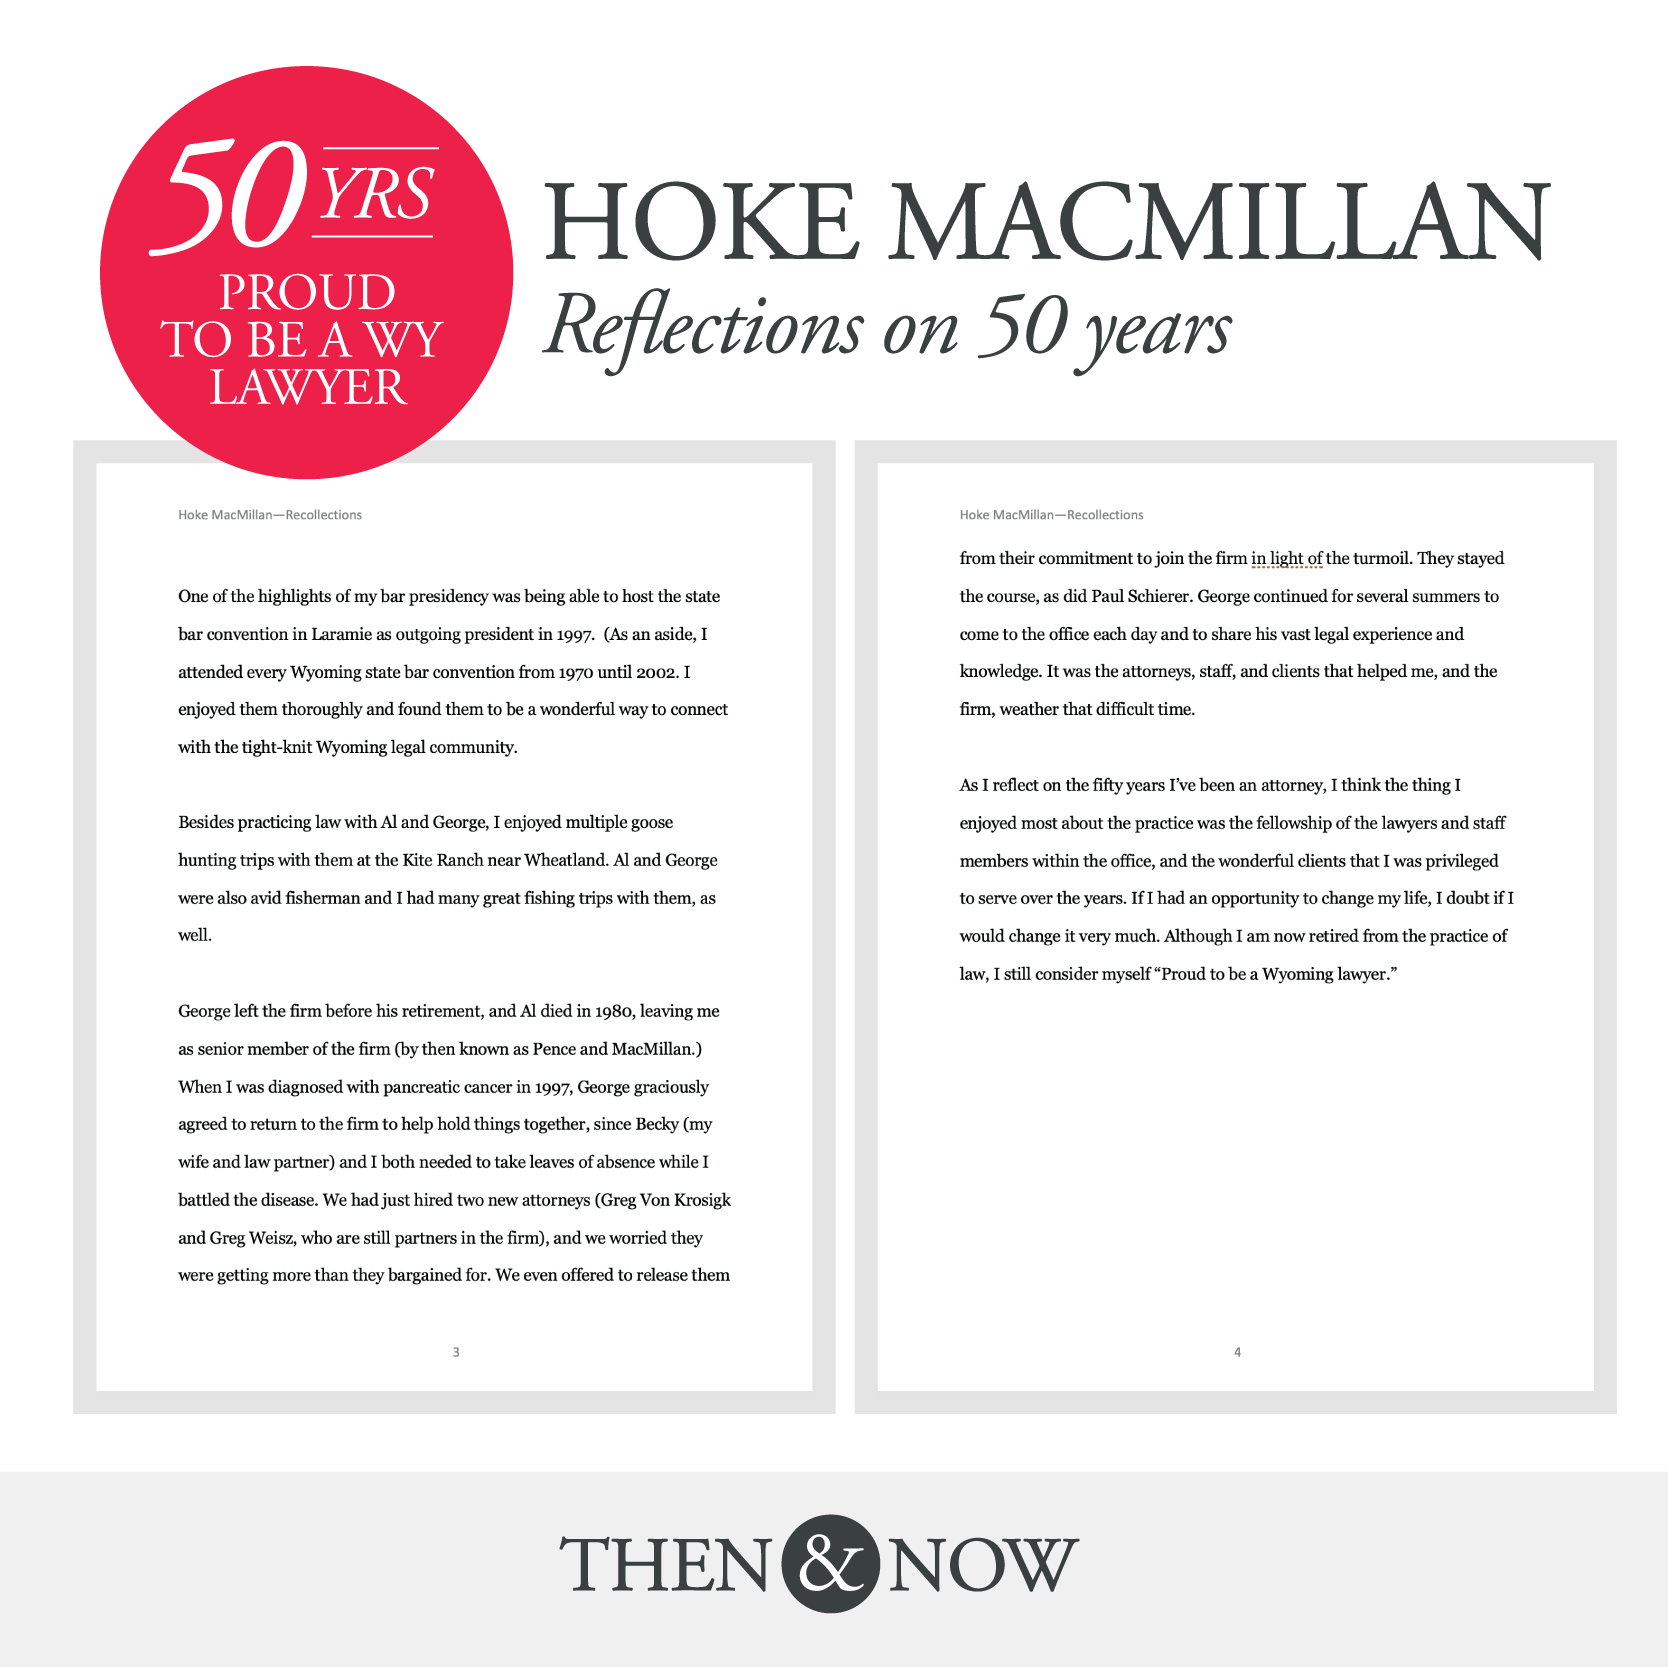 50 Years Proud to Be a Wyoming Lawyer: Hoke MacMillan Reflections on 50 Years